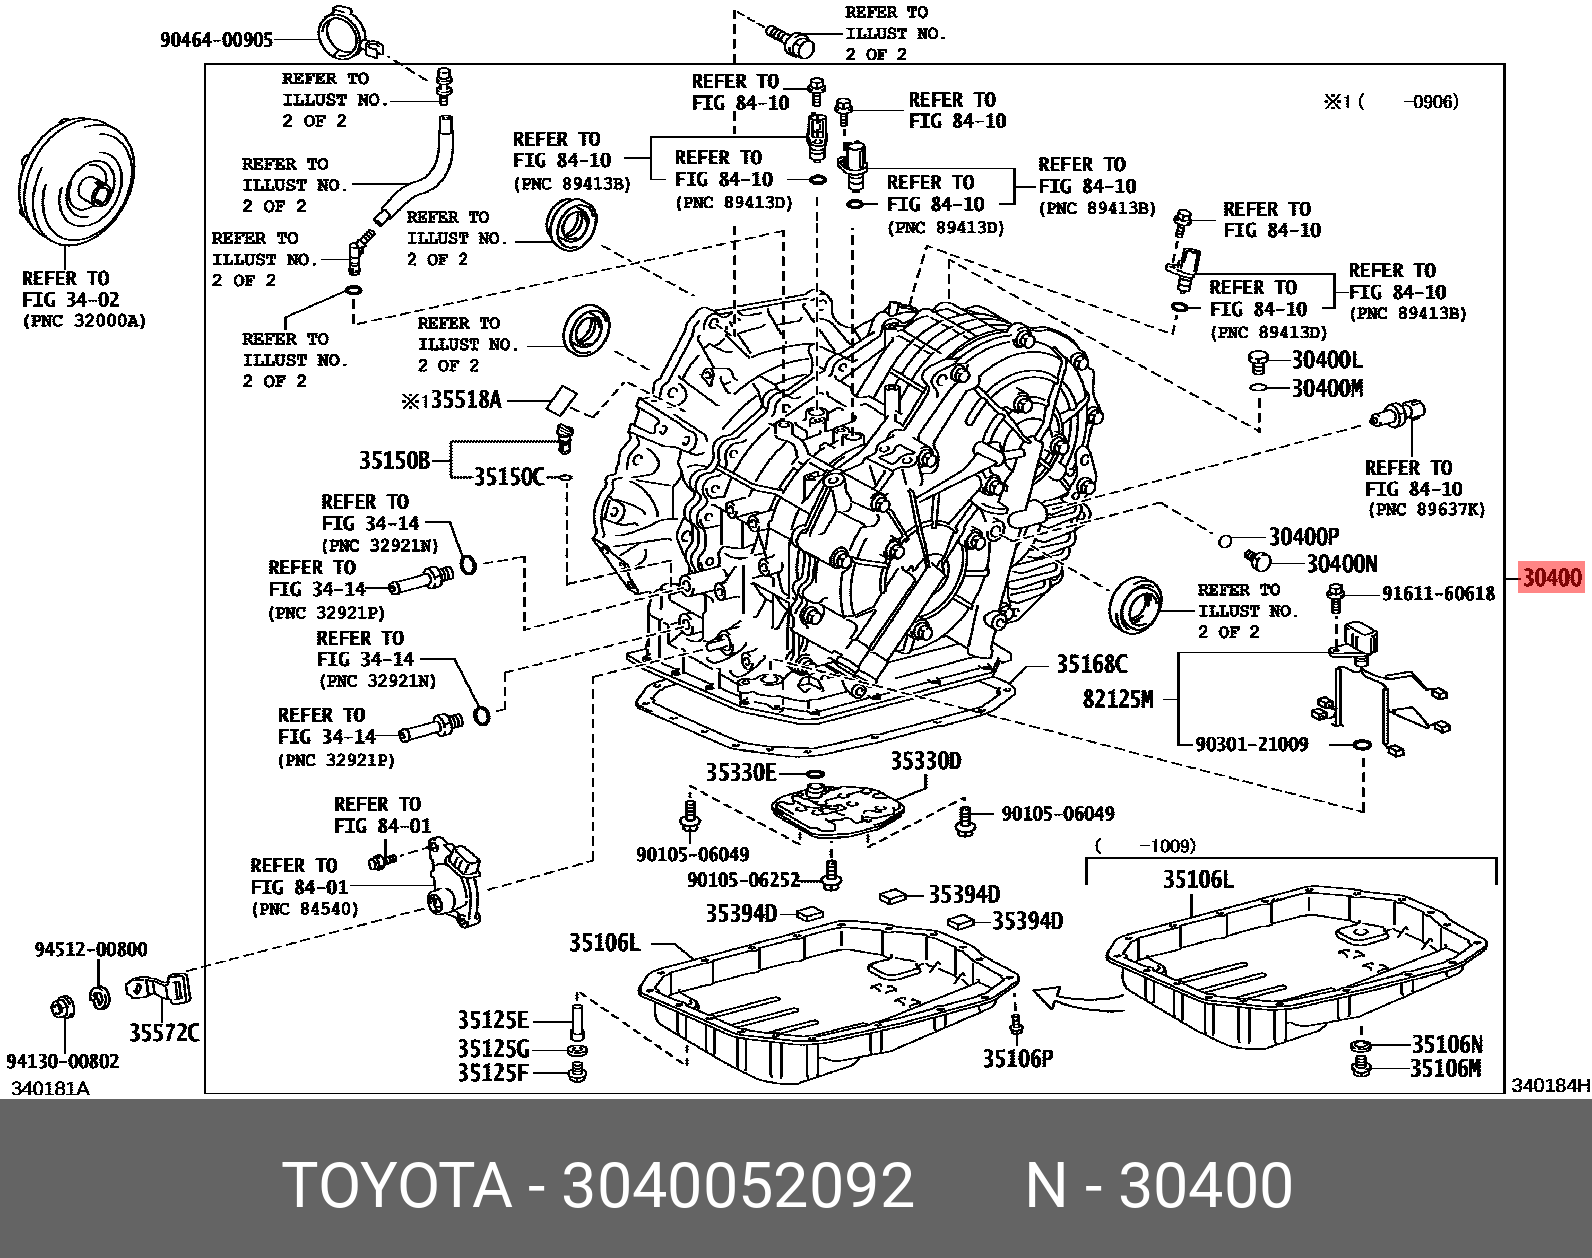 IST 200707 - 201604, TRANSAXLE ASSY, CONTINUOUSLY VARIABLE